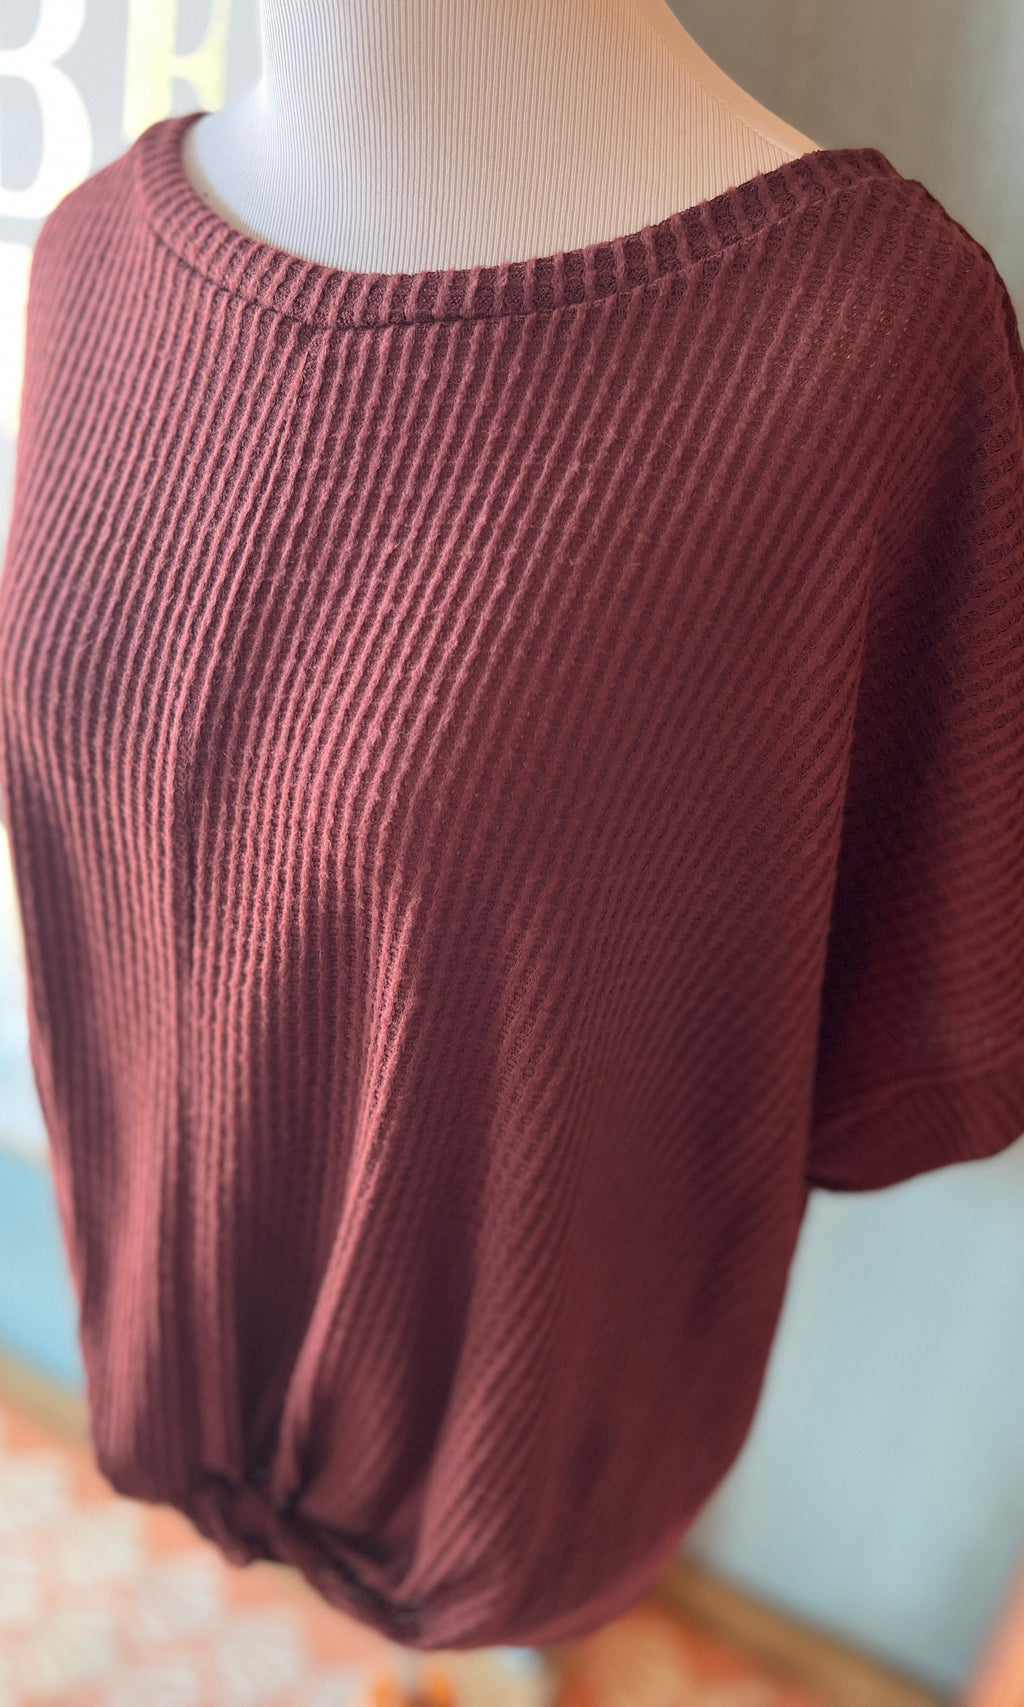 You & Me Maroon Brown Knit Top